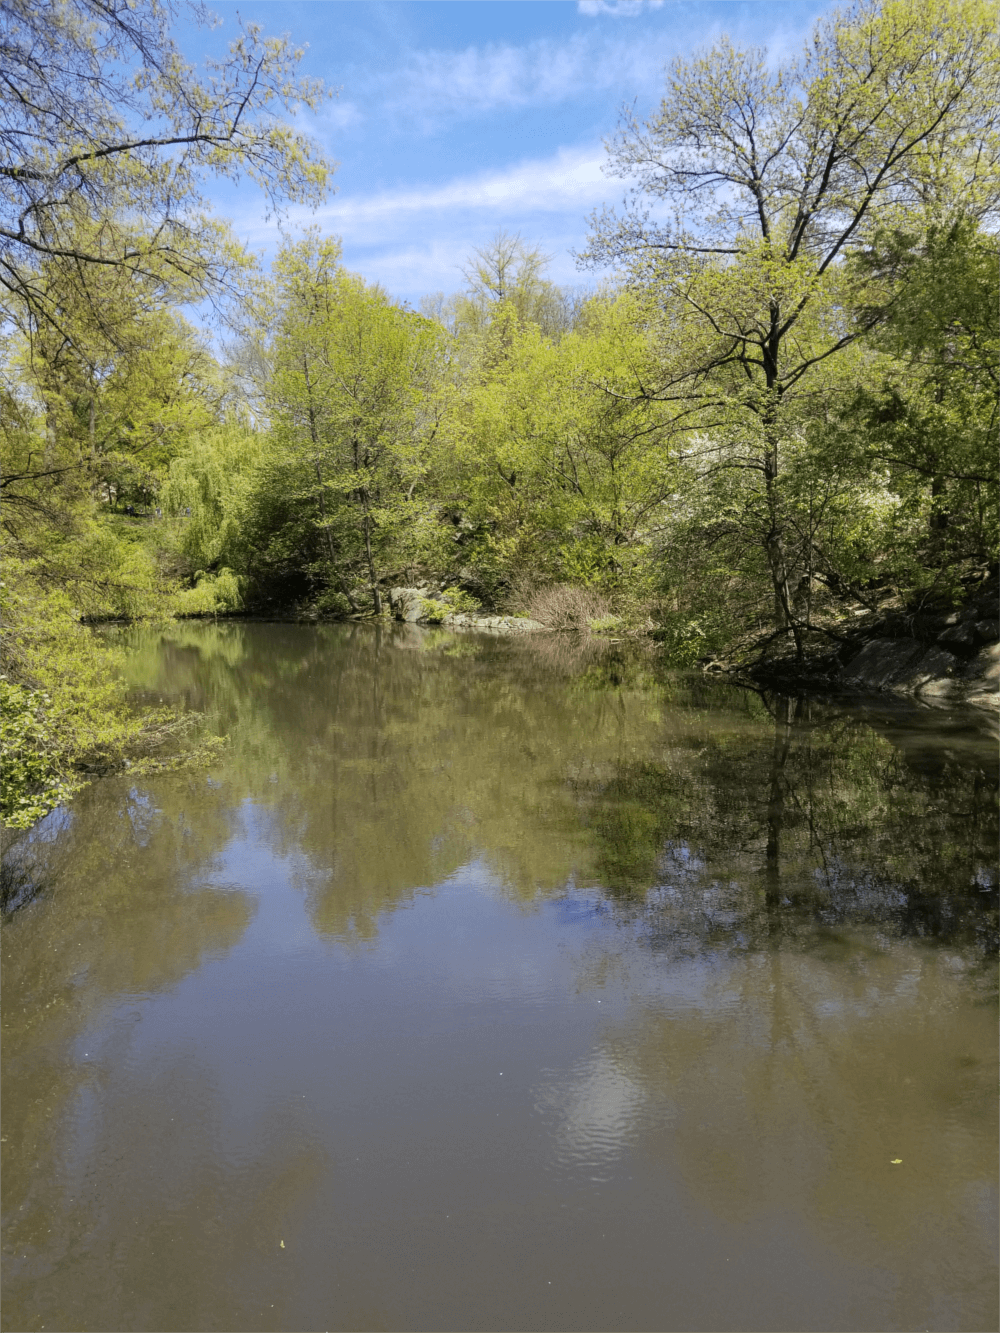 lake and tress in the park